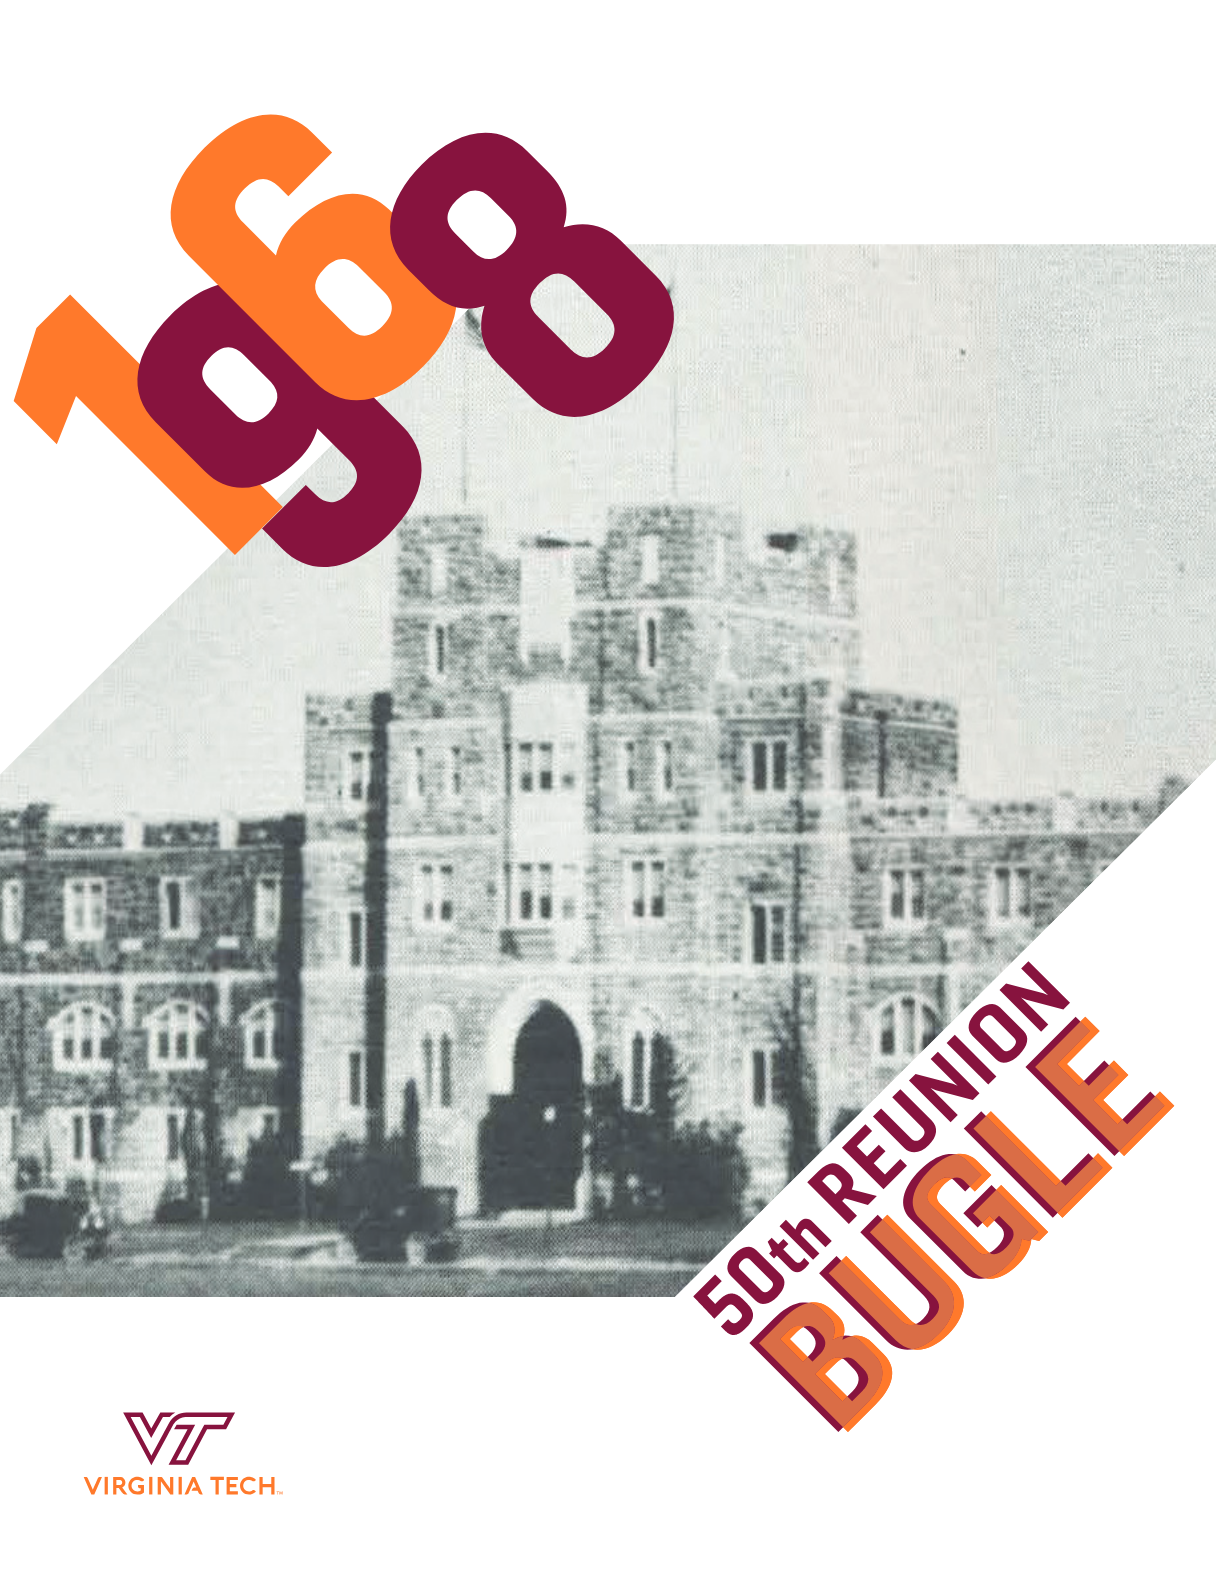 The cover of the Class of 1968 Reunion Bugle